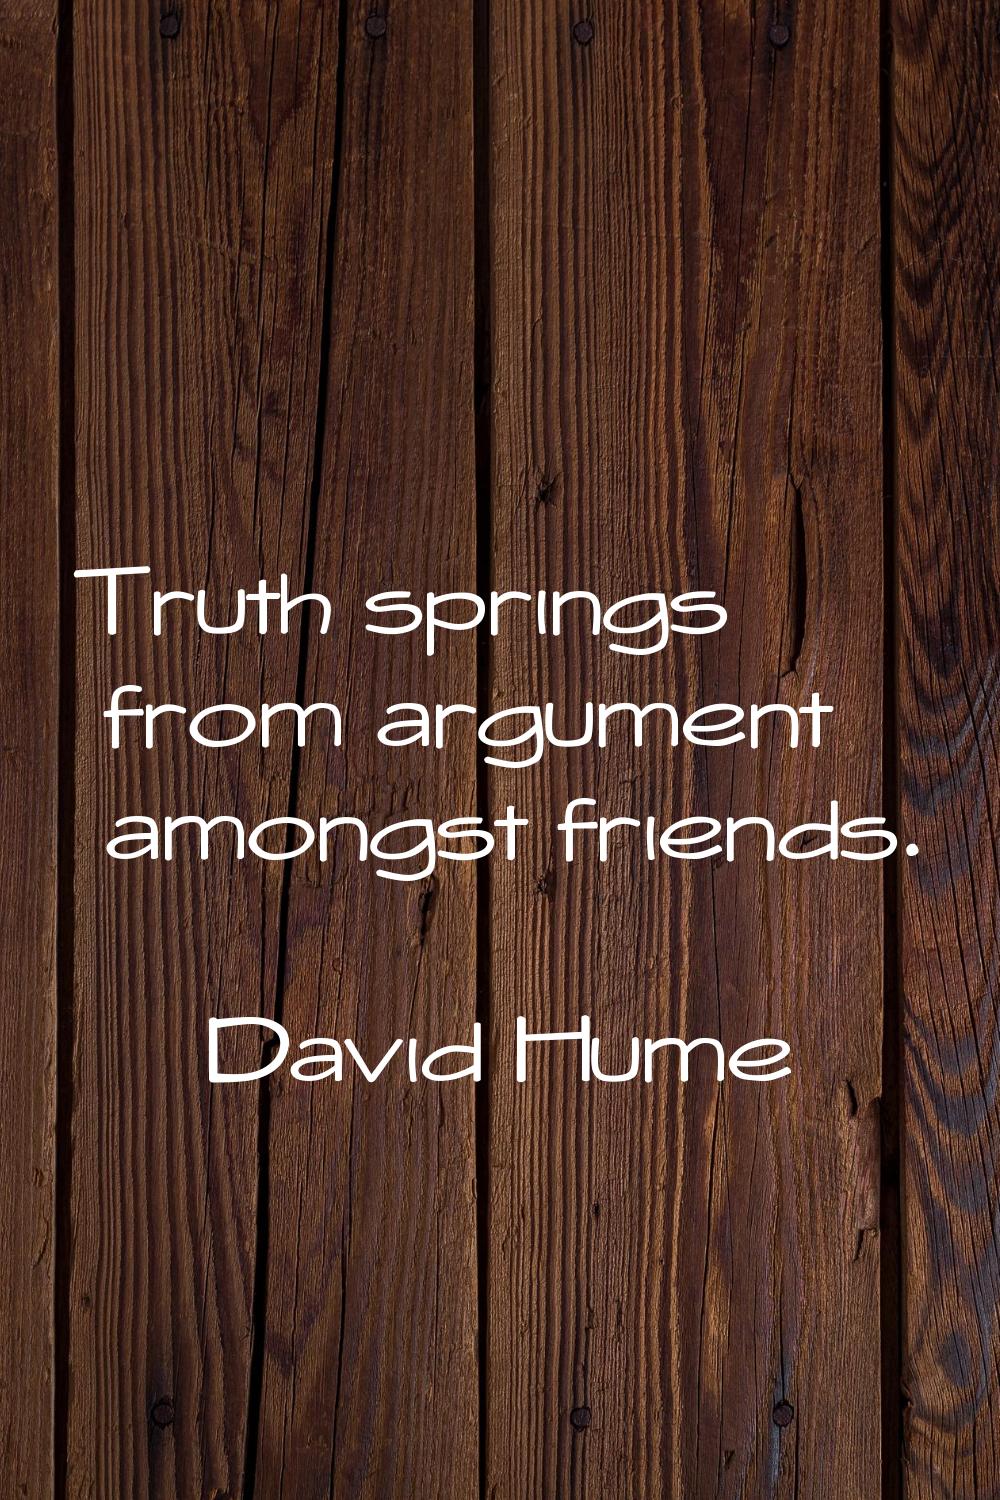 Truth springs from argument amongst friends.